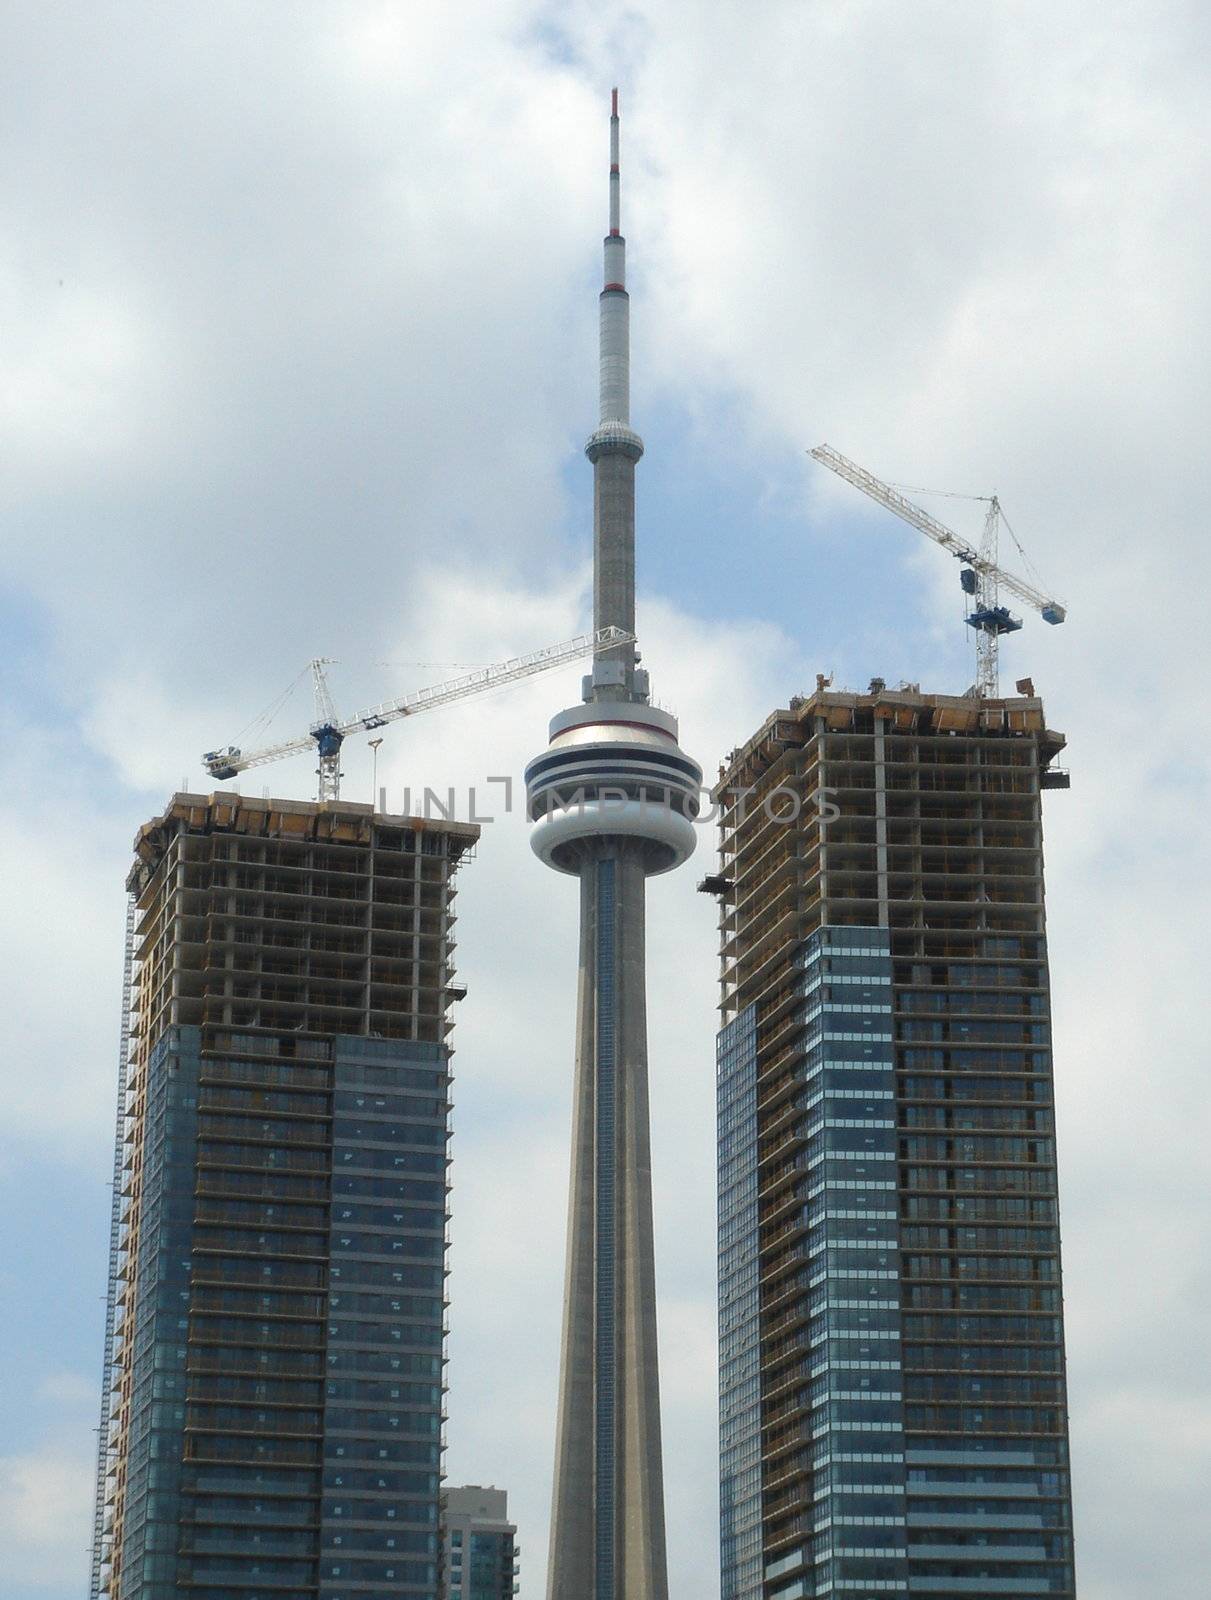 CN Tower of Toronto between two buildings in construction by Elenaphotos21